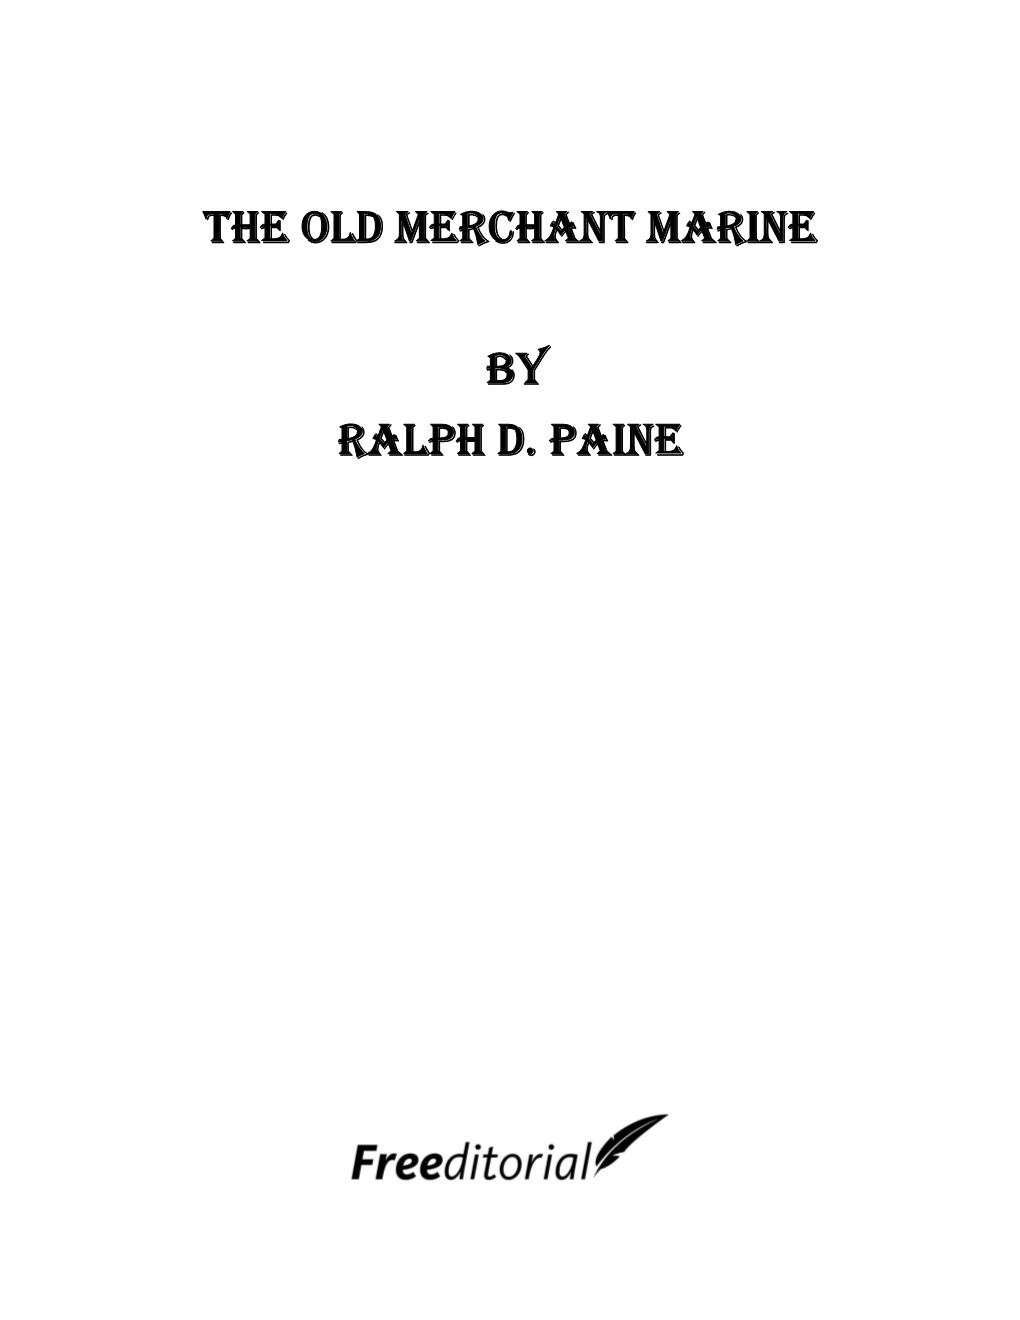 The Old Merchant Marine by Ralph D. Paine